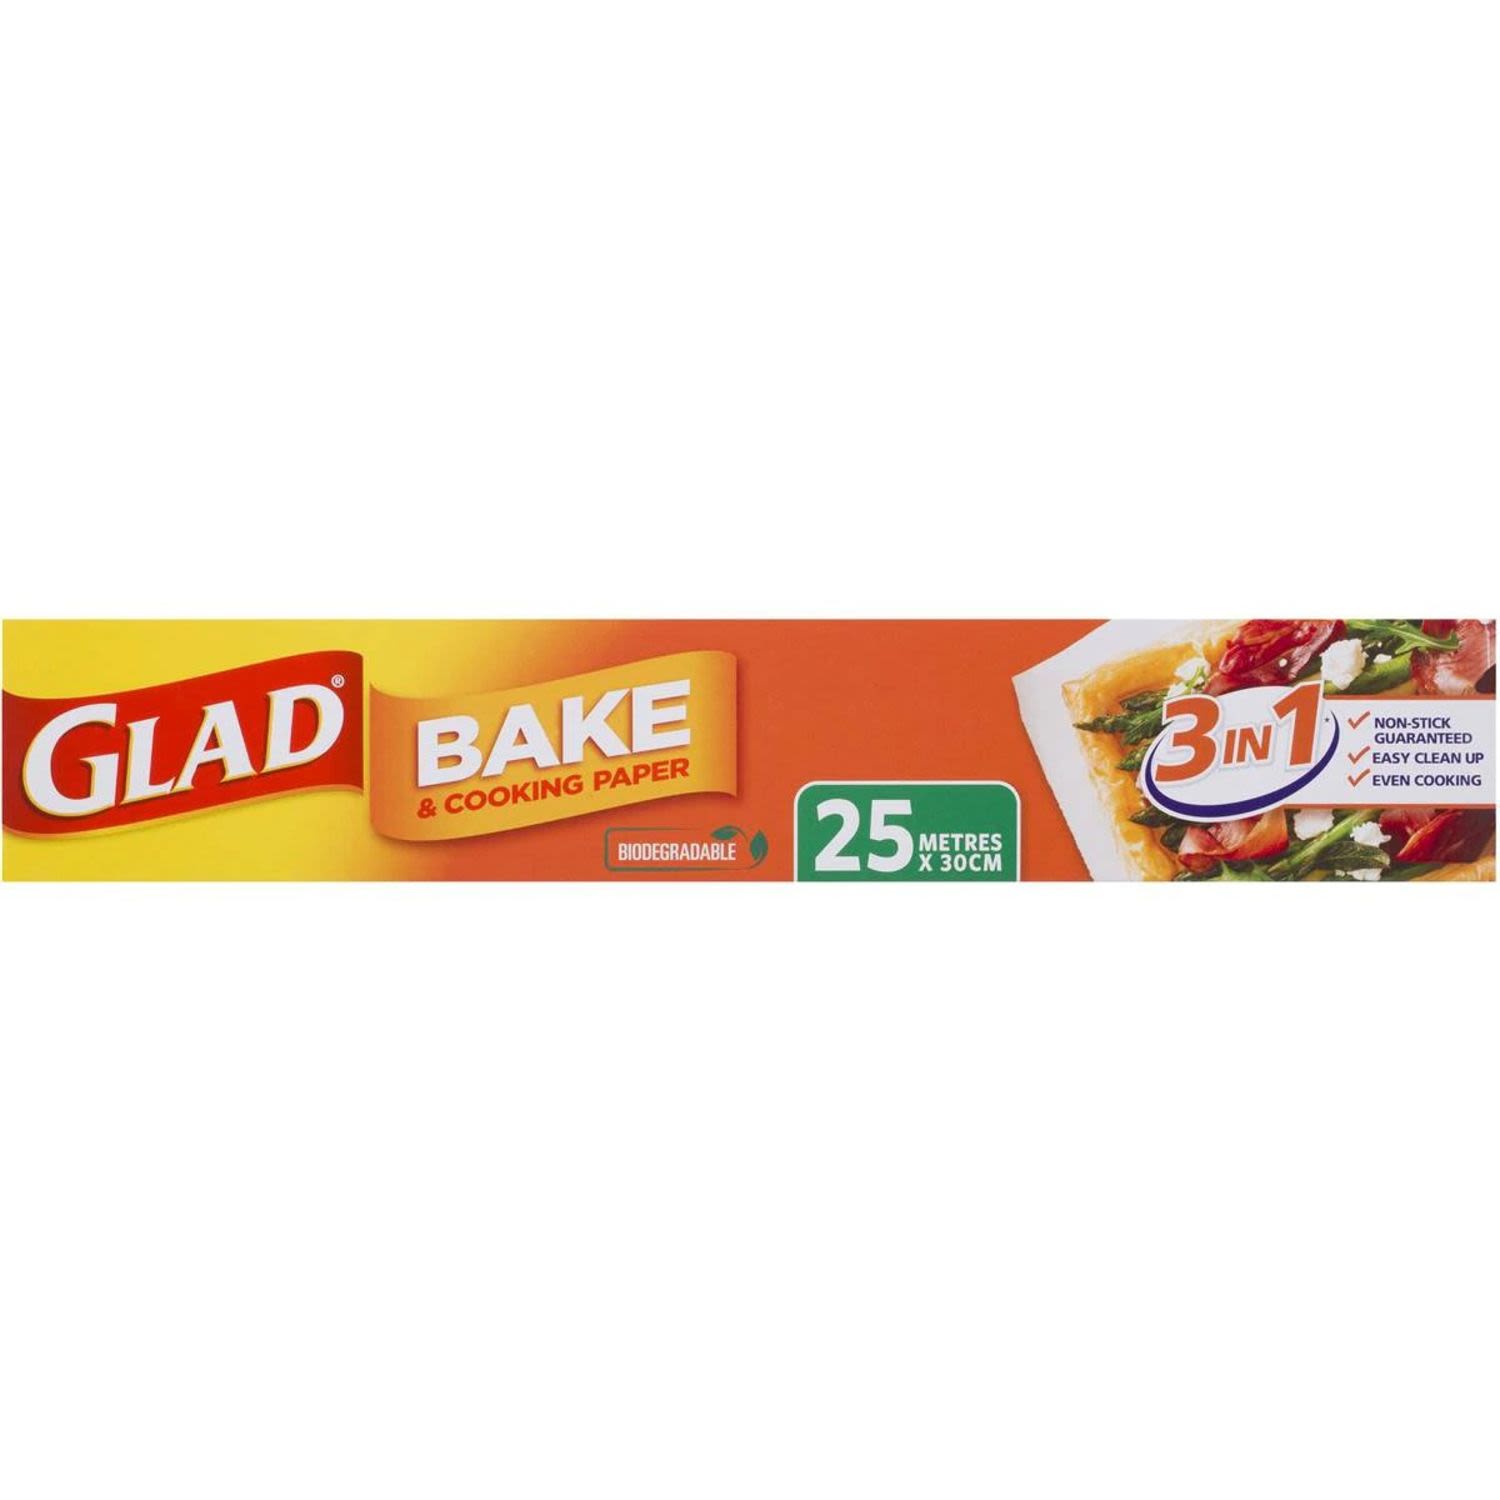 Glad Bake & Cooking Paper 25m, 1 Each